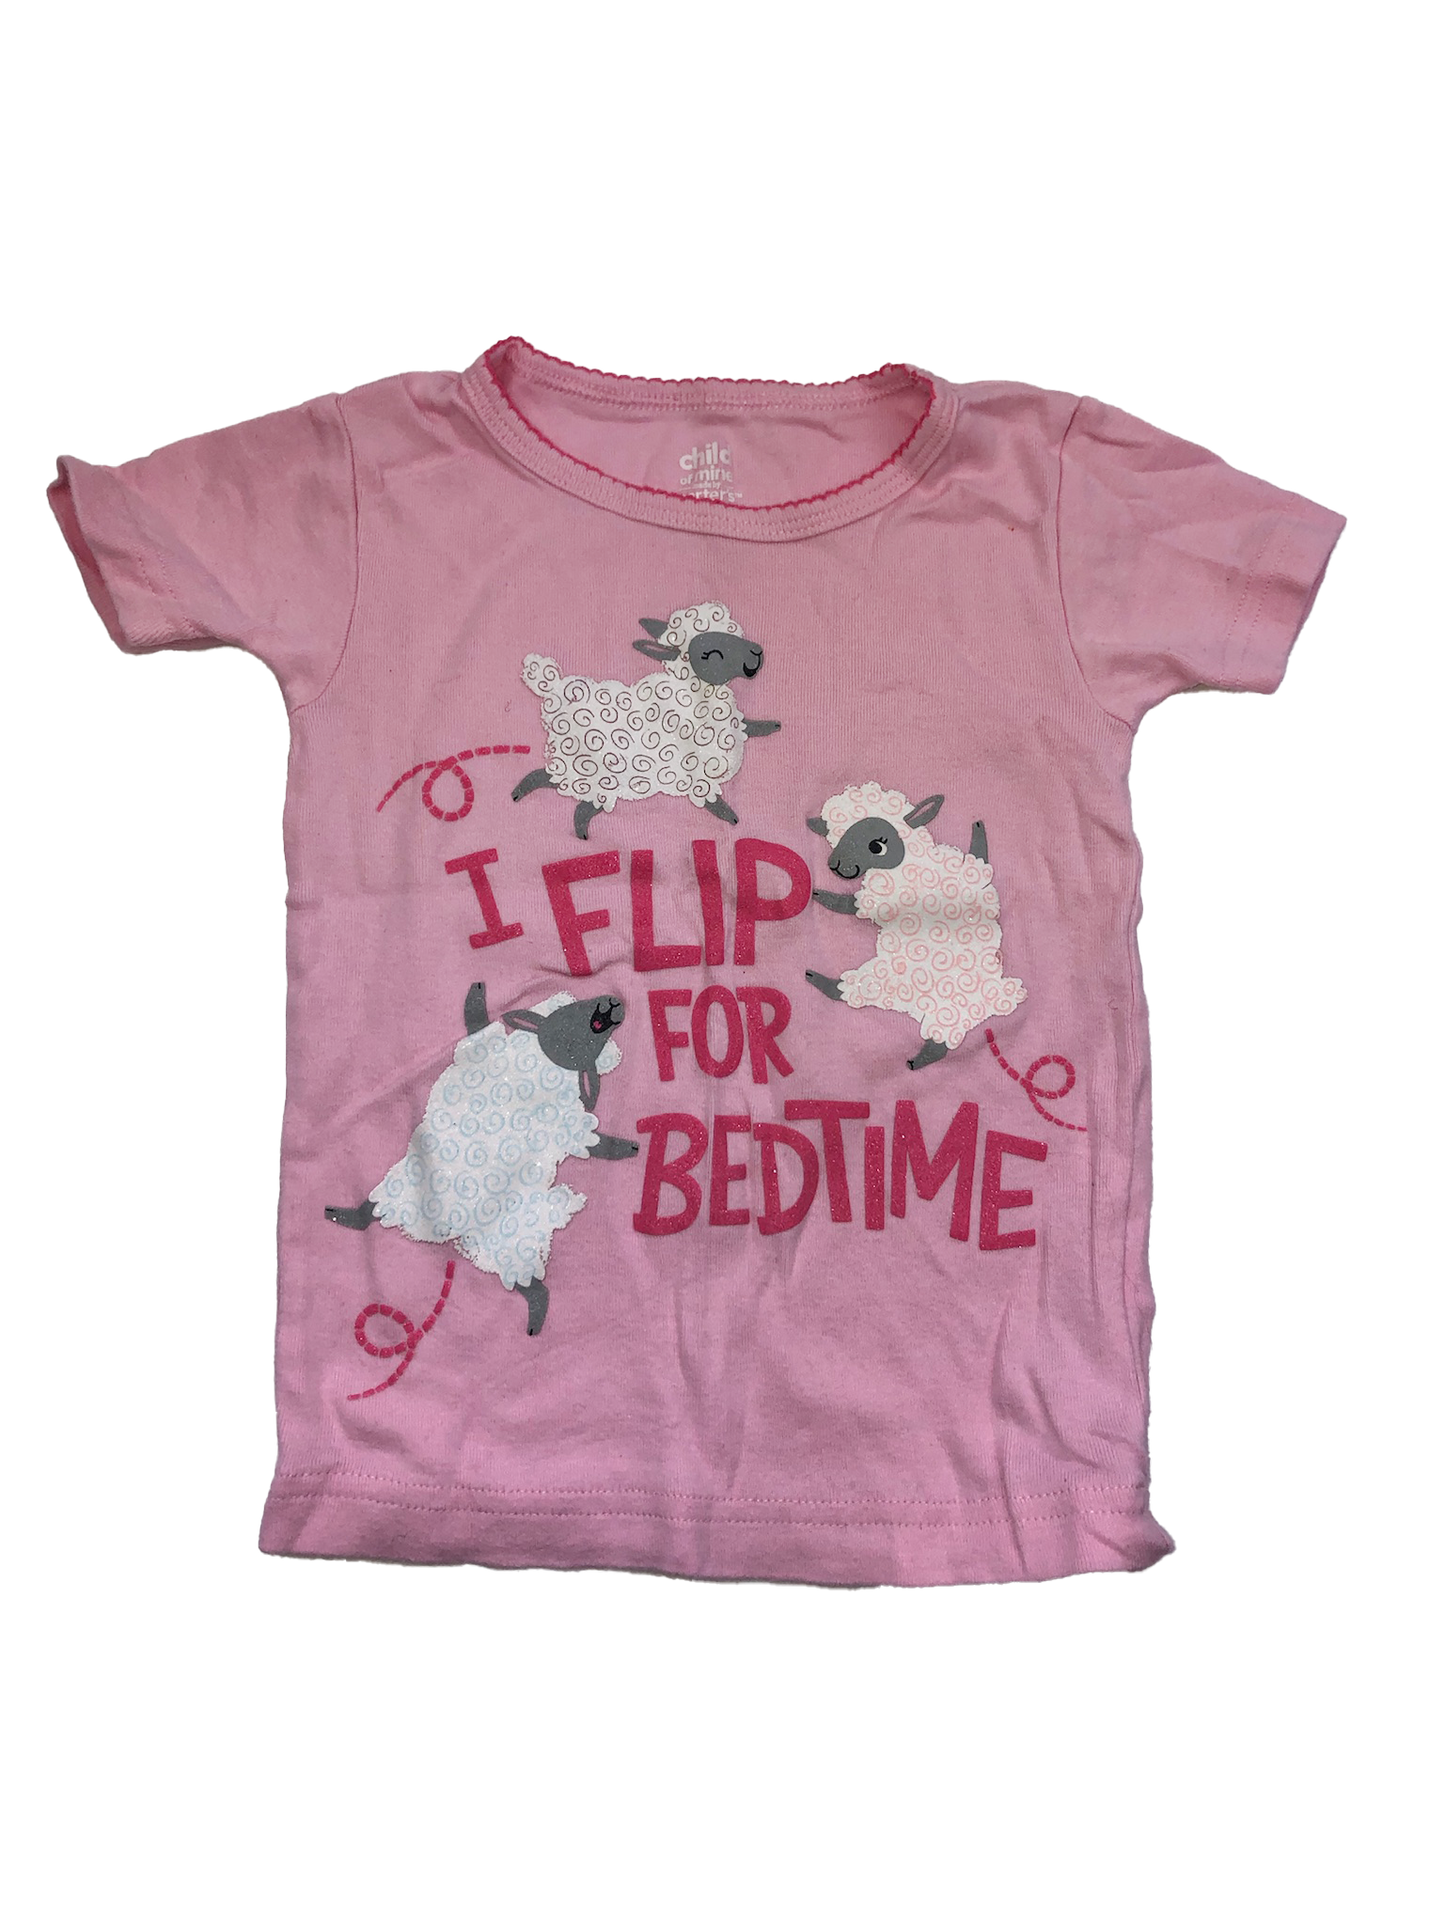 Child of Mine Pink PJ Top with "I Flip For Bedtime" & Sheep 2T